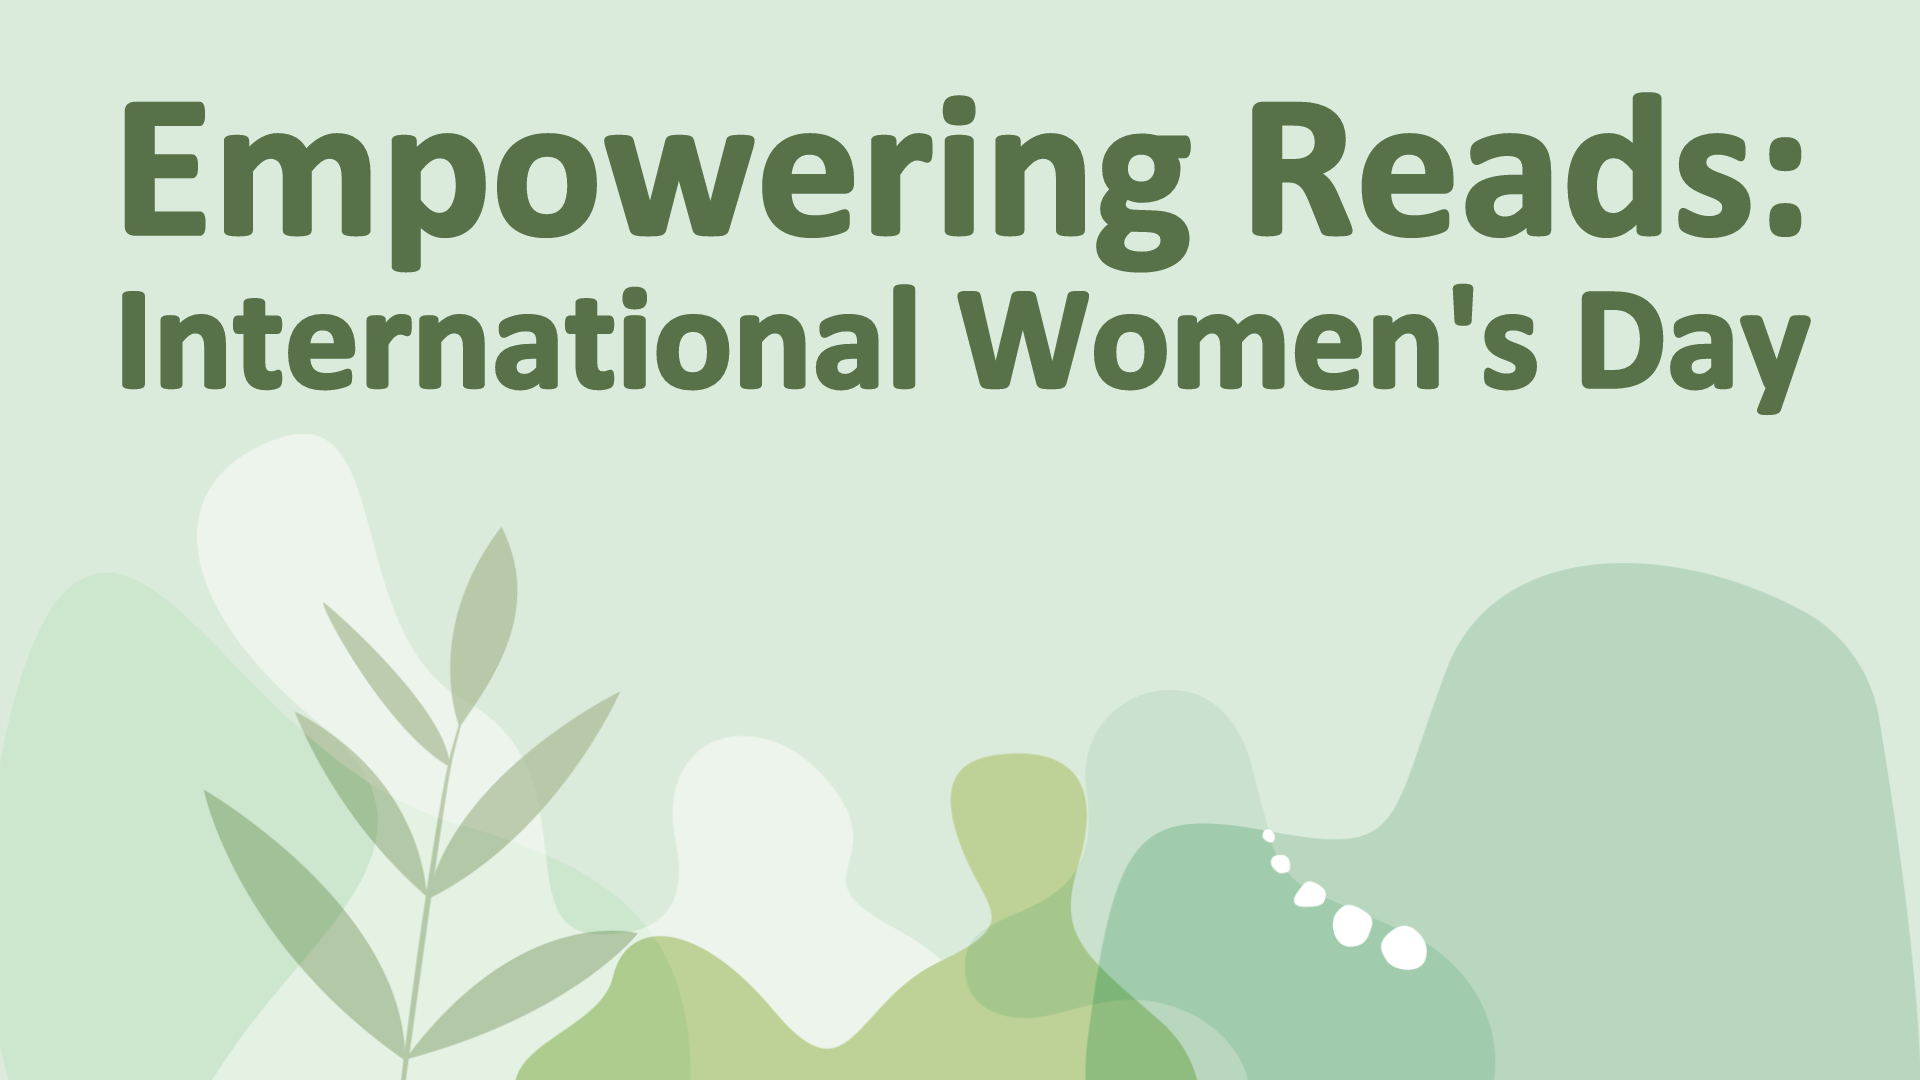 A green botanical background with text reading Empowering Reads - International Women's Day.